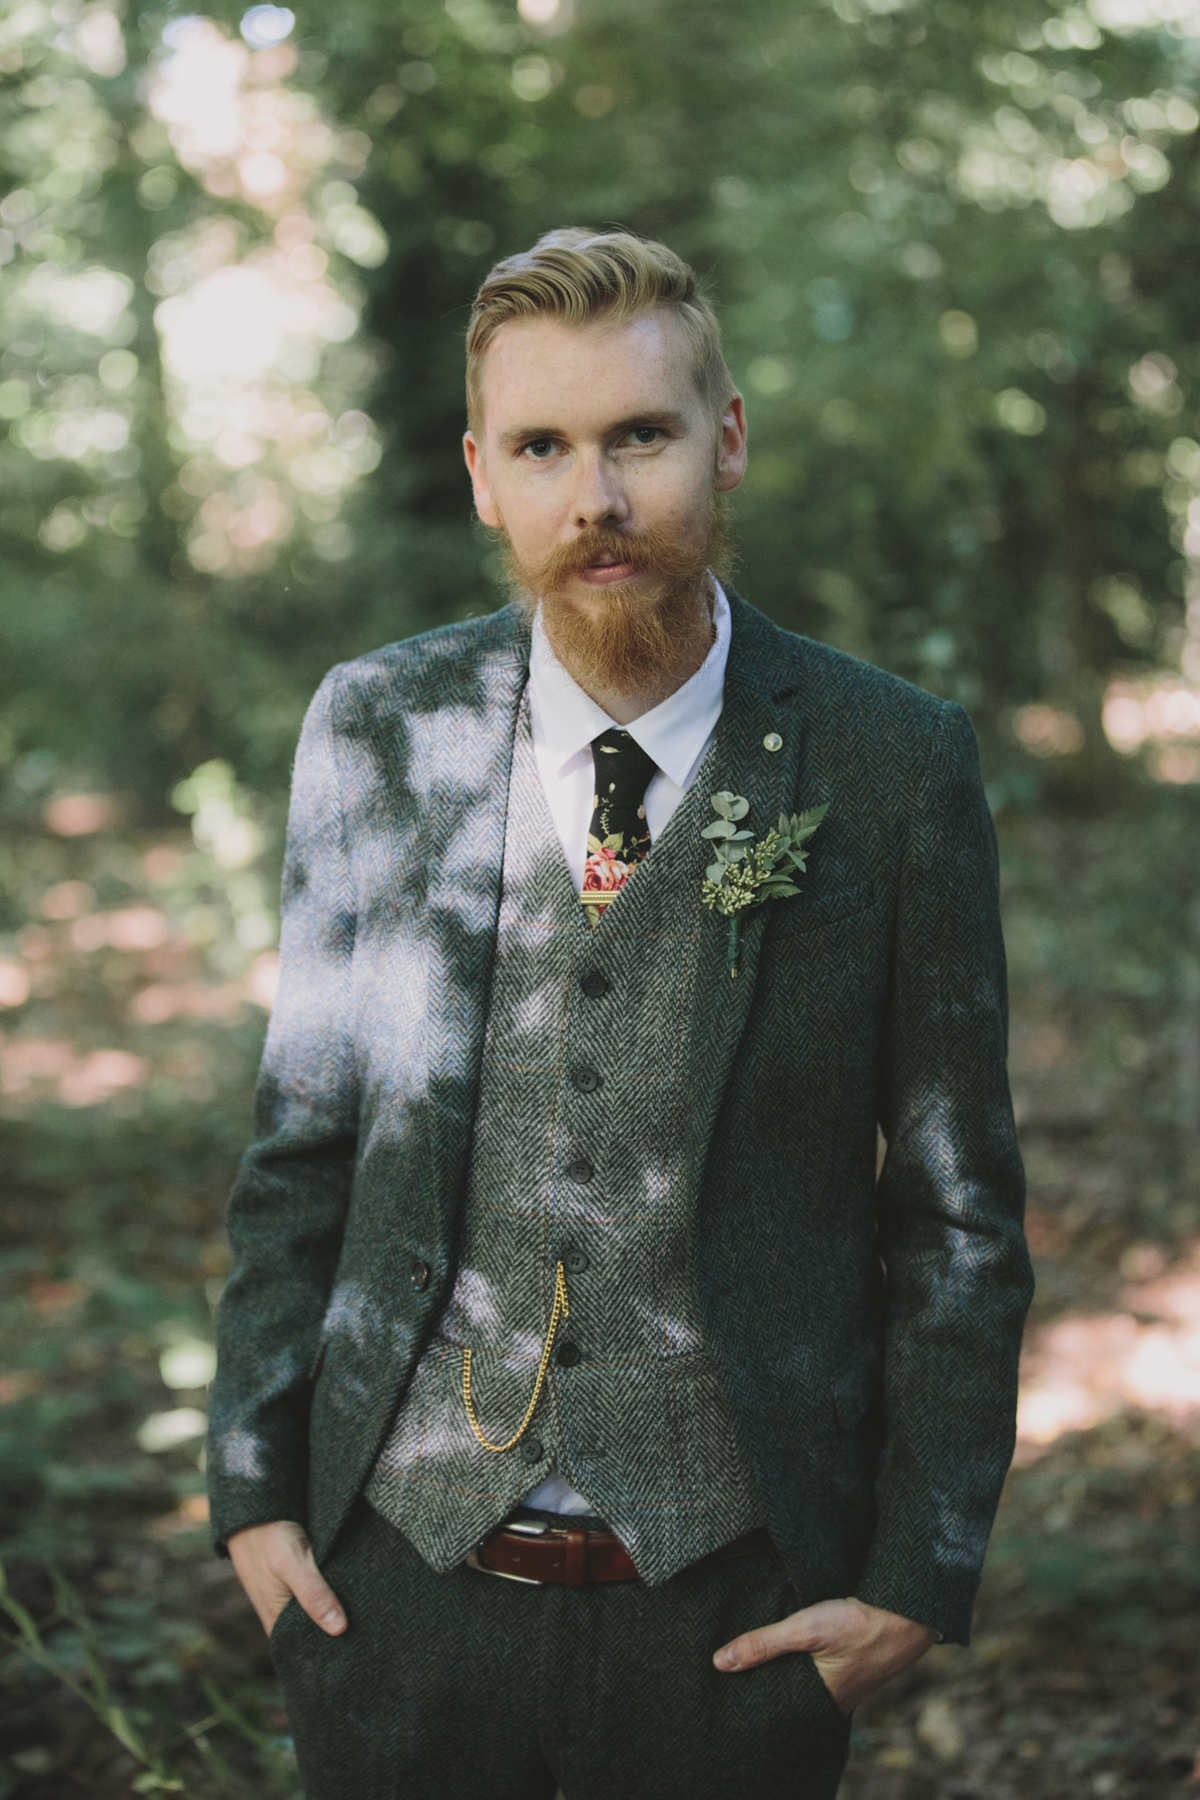 71 Groom with a handlebar moustache in an ASOS suit images by McKinley Rodgers